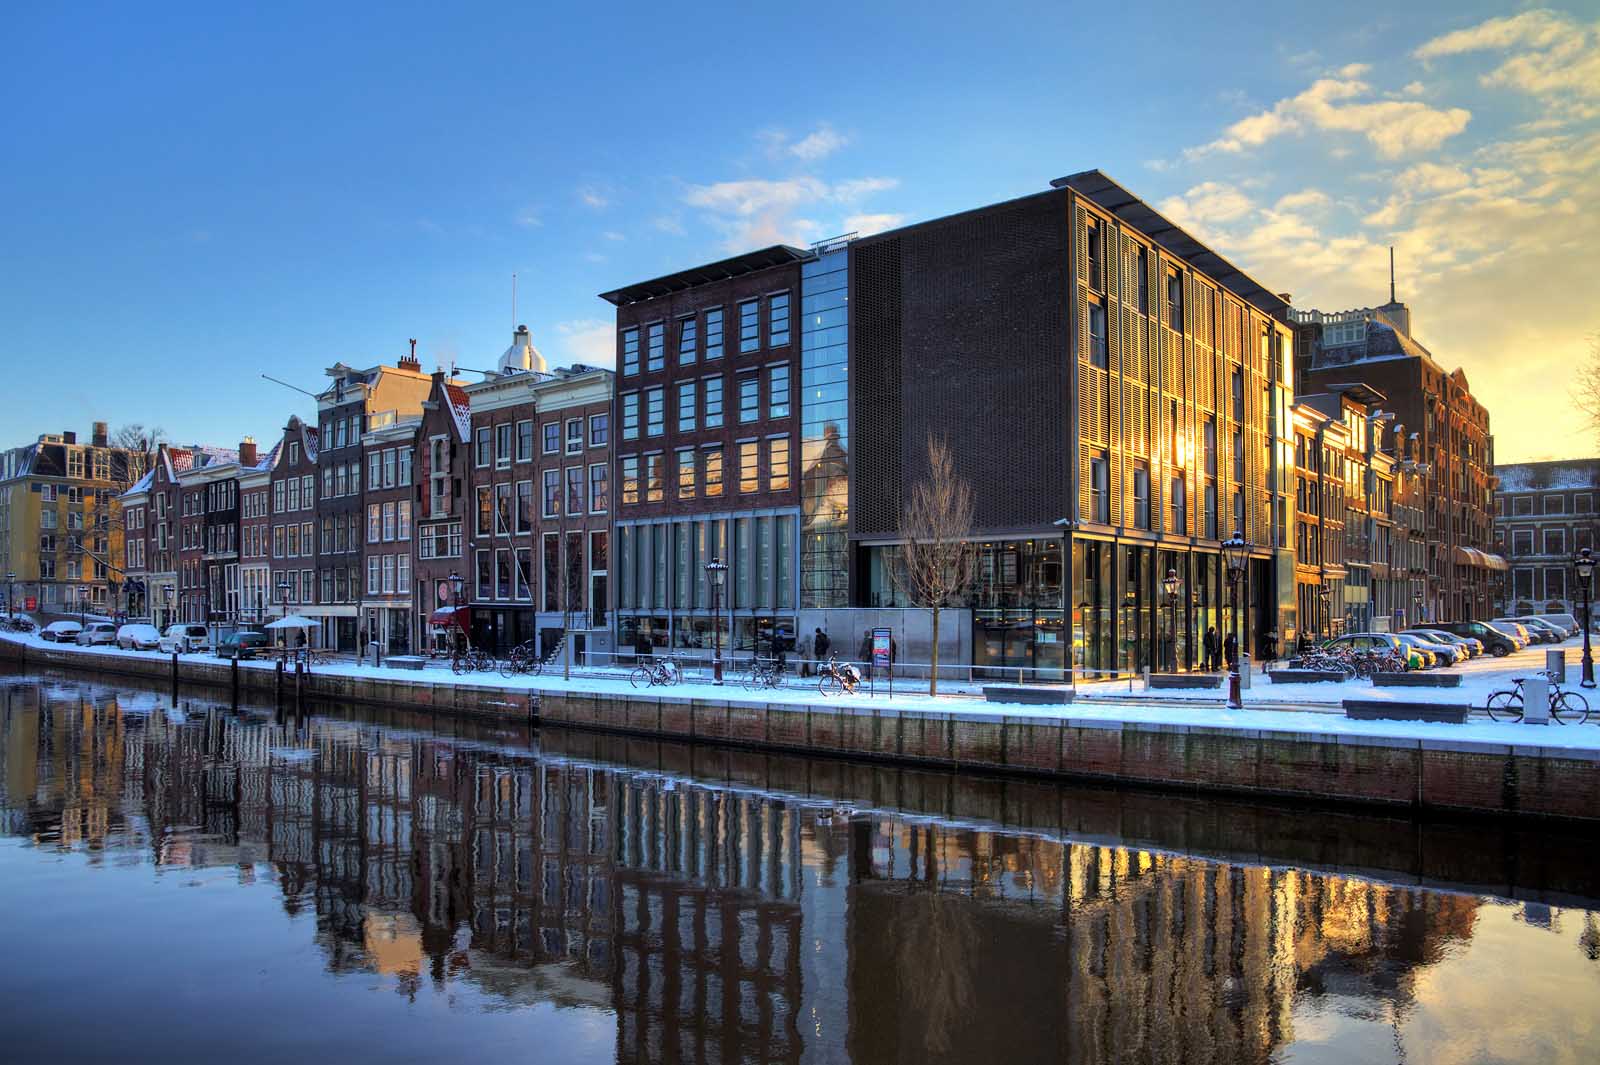 Tips to Visit Anne Frank House Museum in Amsterdam